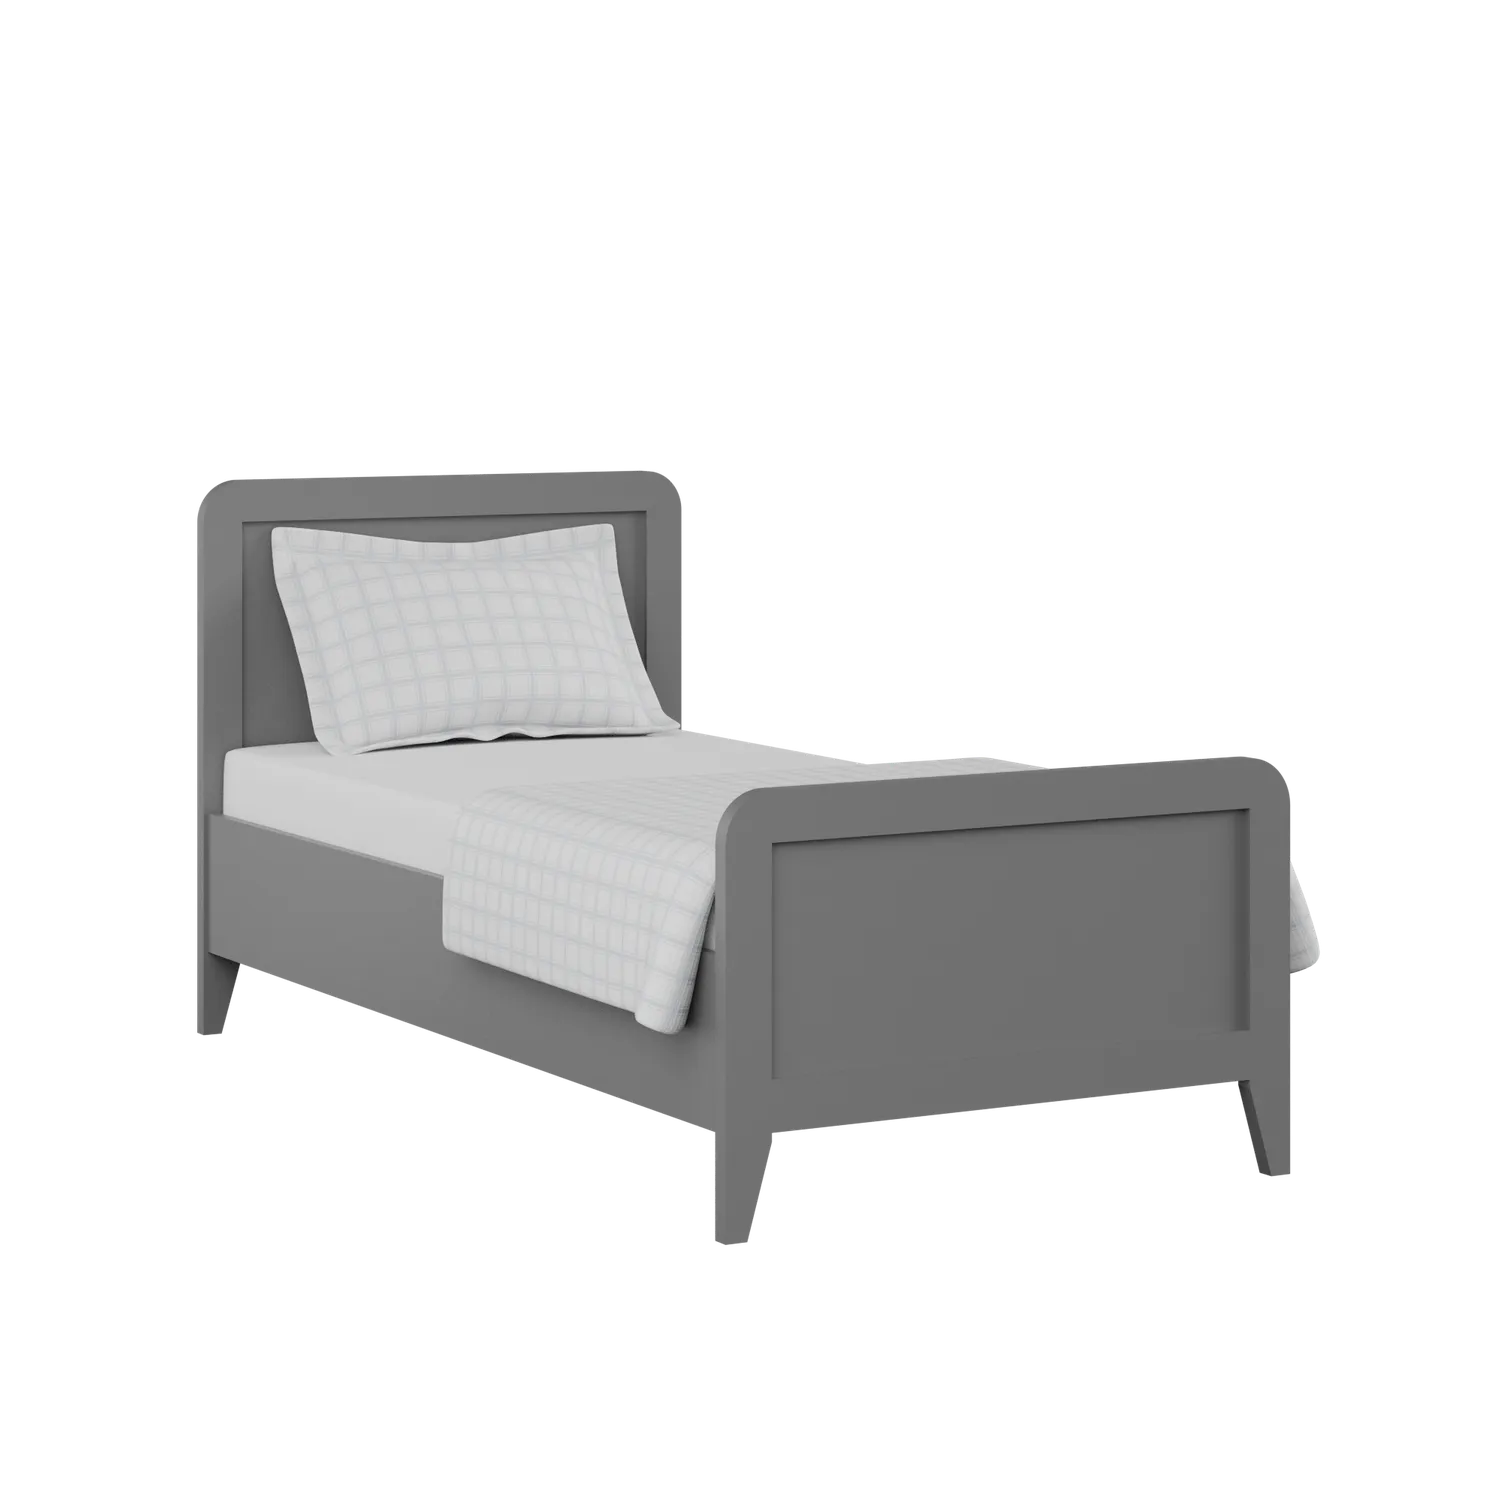 Keats Painted single painted wood bed in grey with Juno mattress